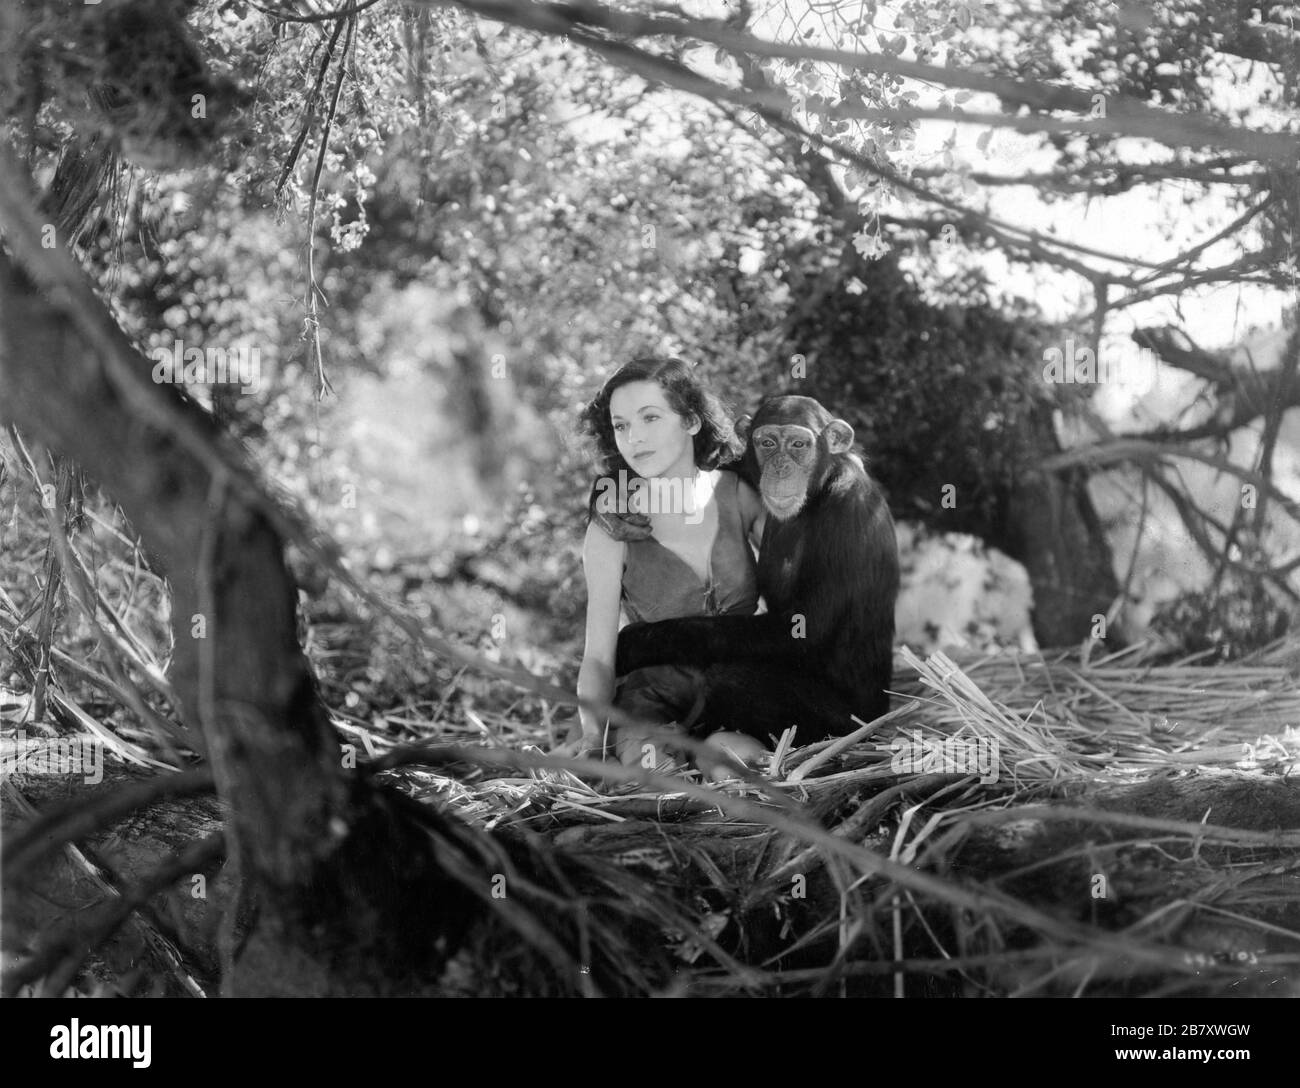 MAUREEN O'SULLIVAN as Jane Parker with CHEETAH in TARZAN AND HIS MATE 1934 directors CEDRIC GIBBONS and JACK CONWAY characters EDGAR RICE BURROUGHS Photo by TED ALLAN Metro Goldwyn Mayer Stock Photo